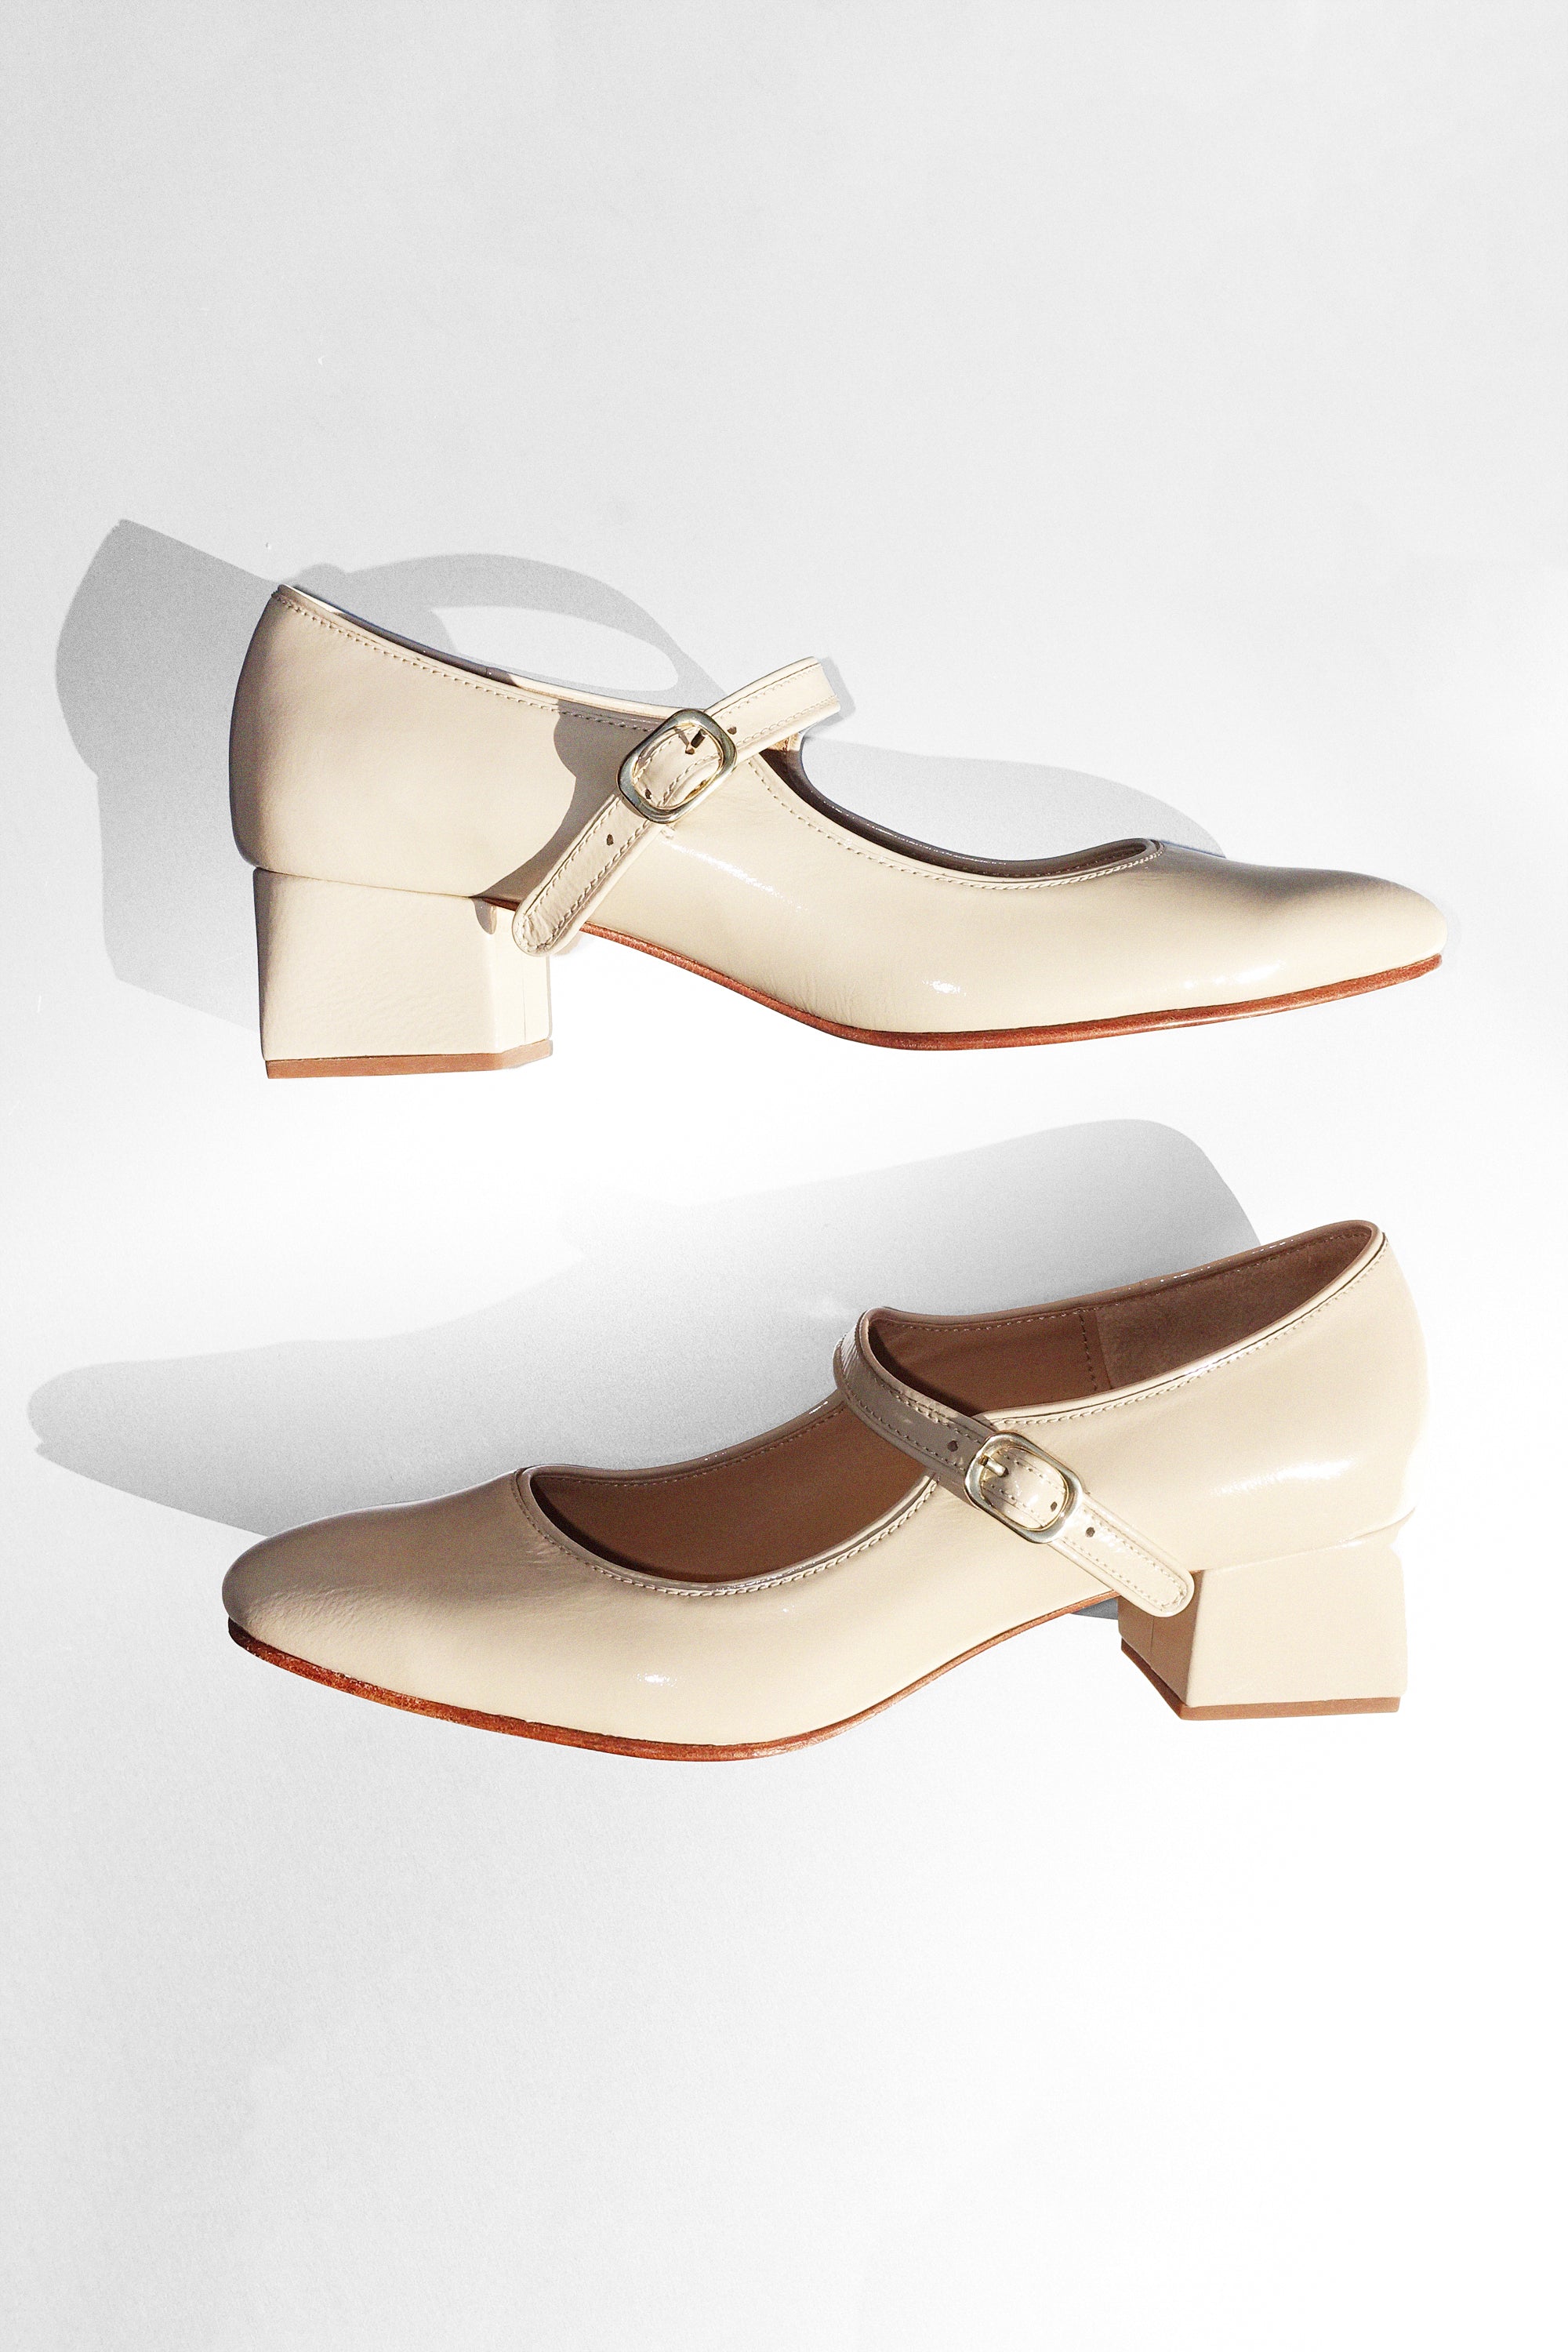 Florence Heel in Cream Patent Leather by Caron Callahan